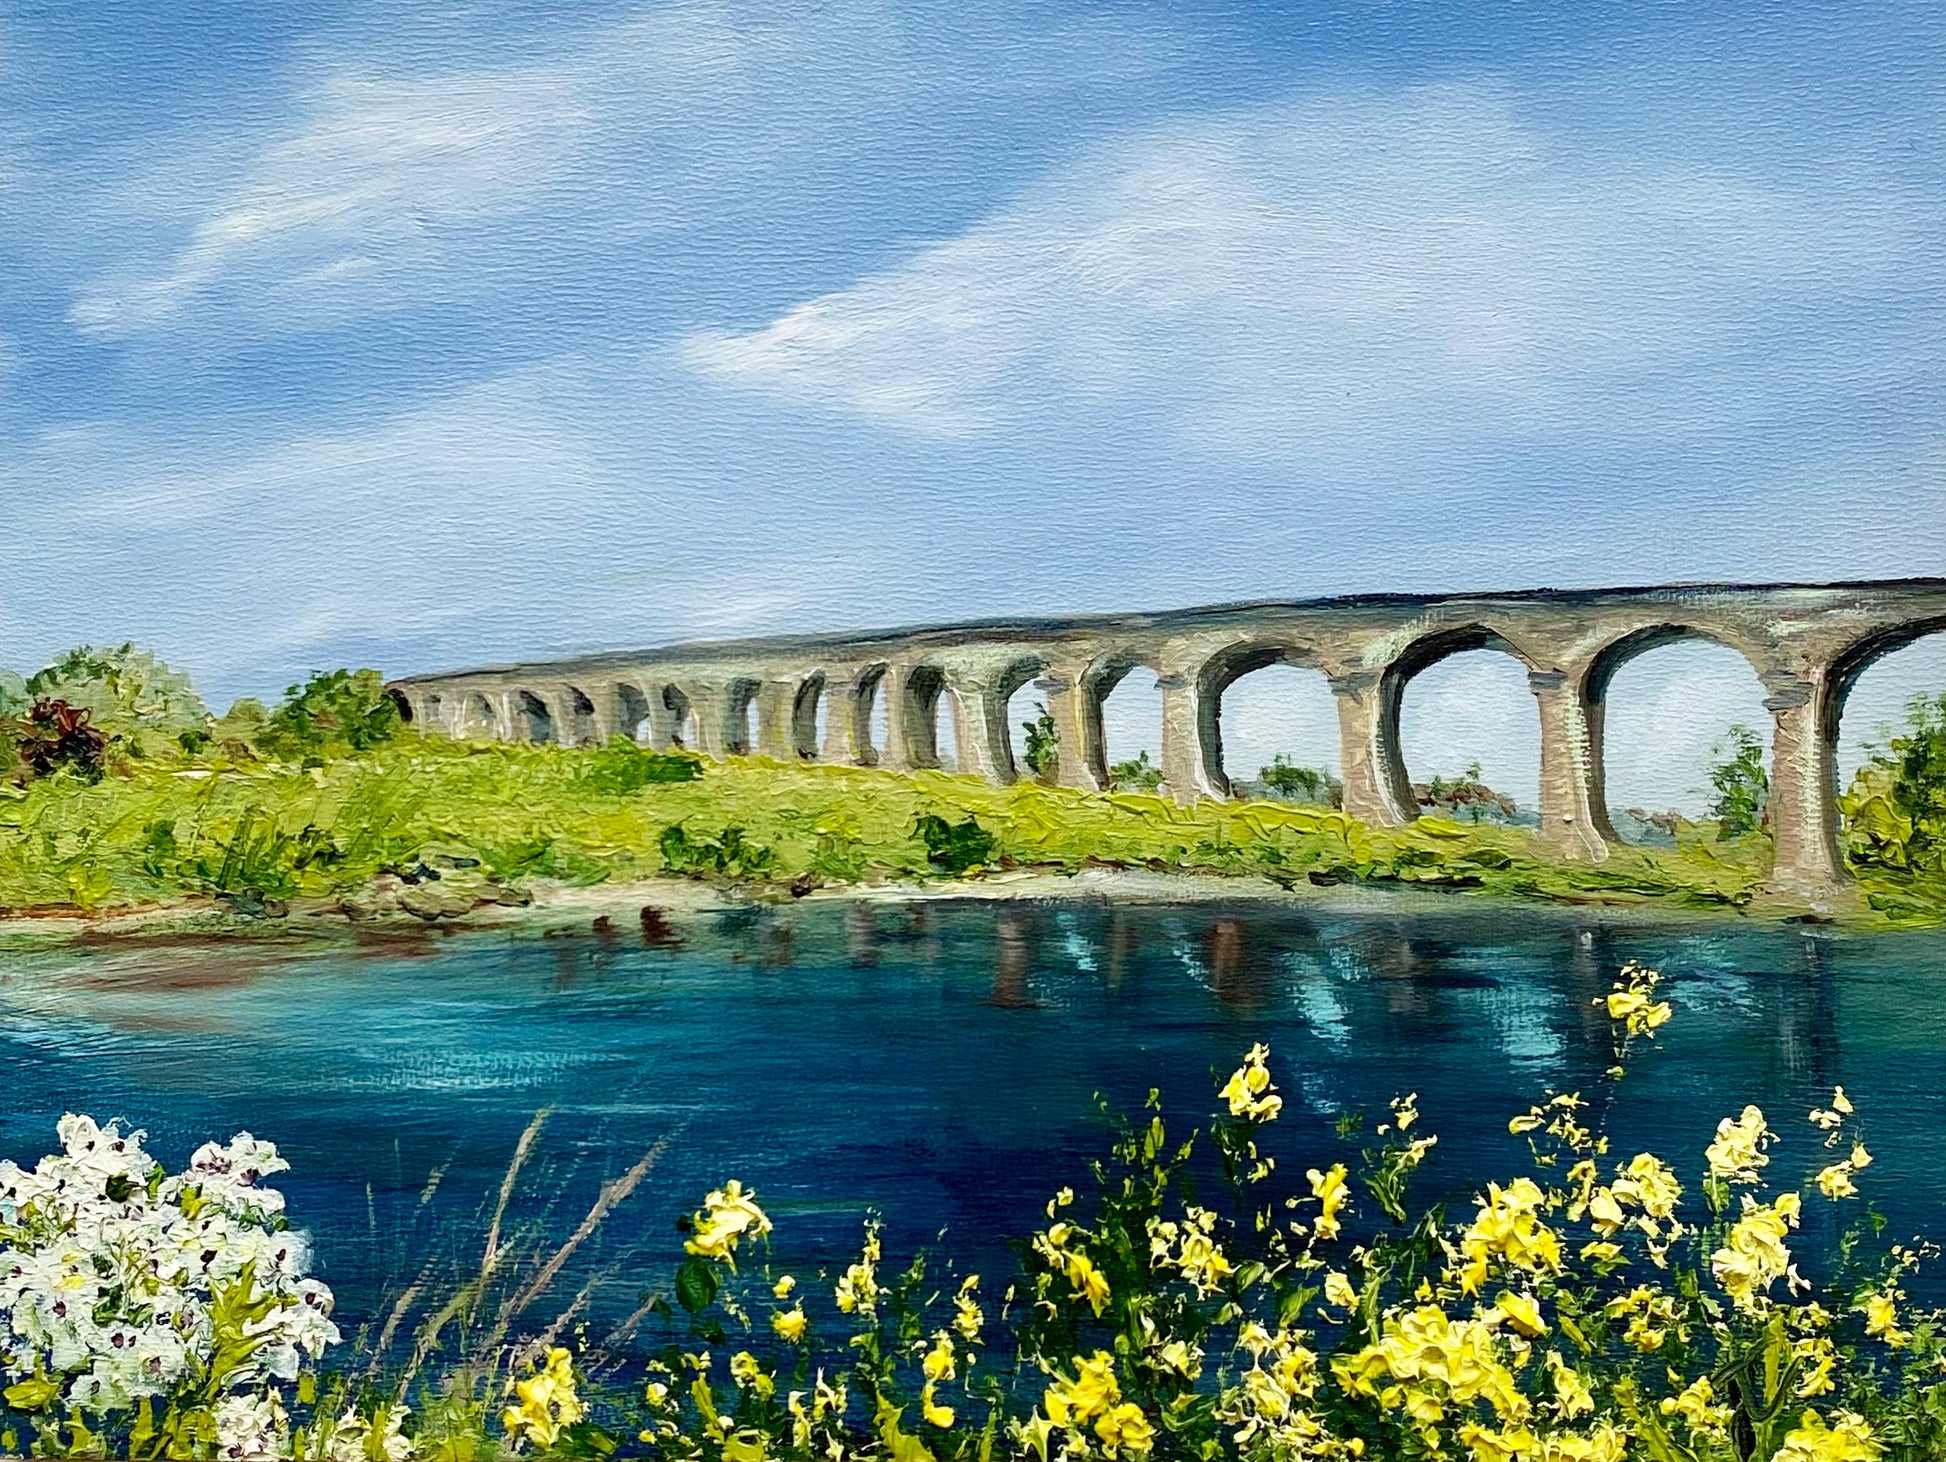 Landscape painting of viaduct viewed across river and textured flowers on the bank